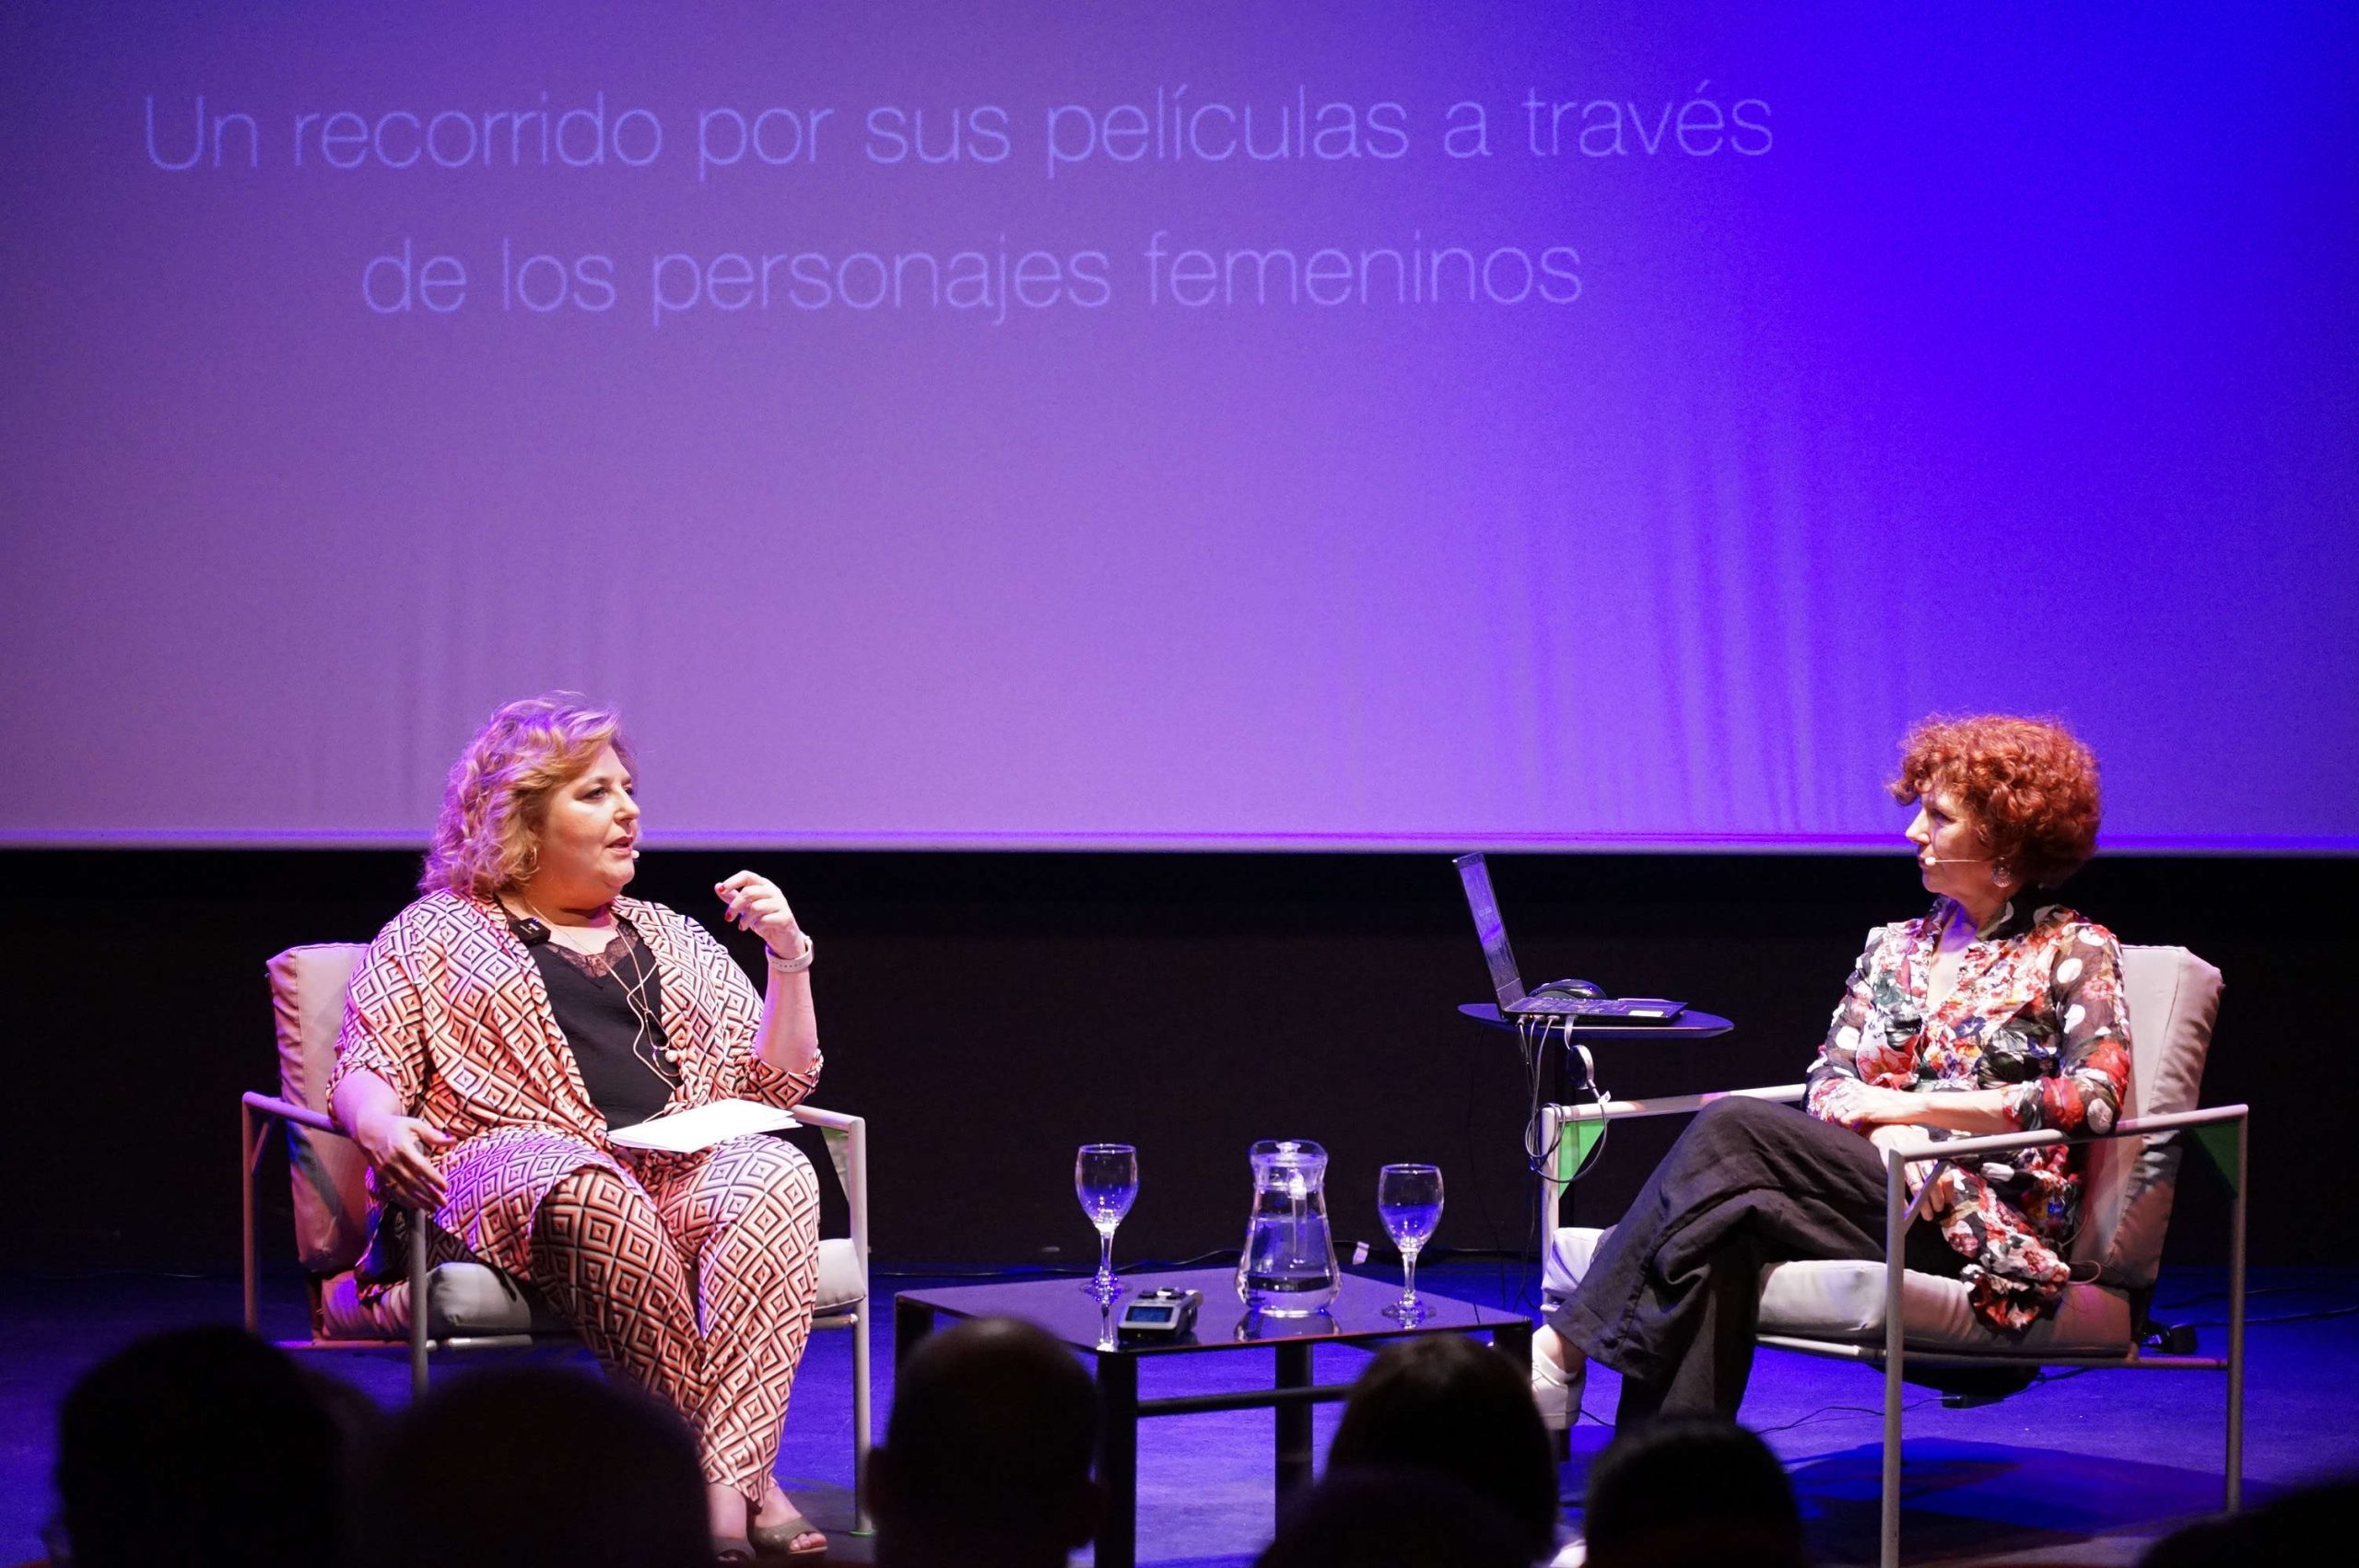 Iciar Bollaín Reviews the Female Characters in Her Films at the Closing of “Filming Lab”